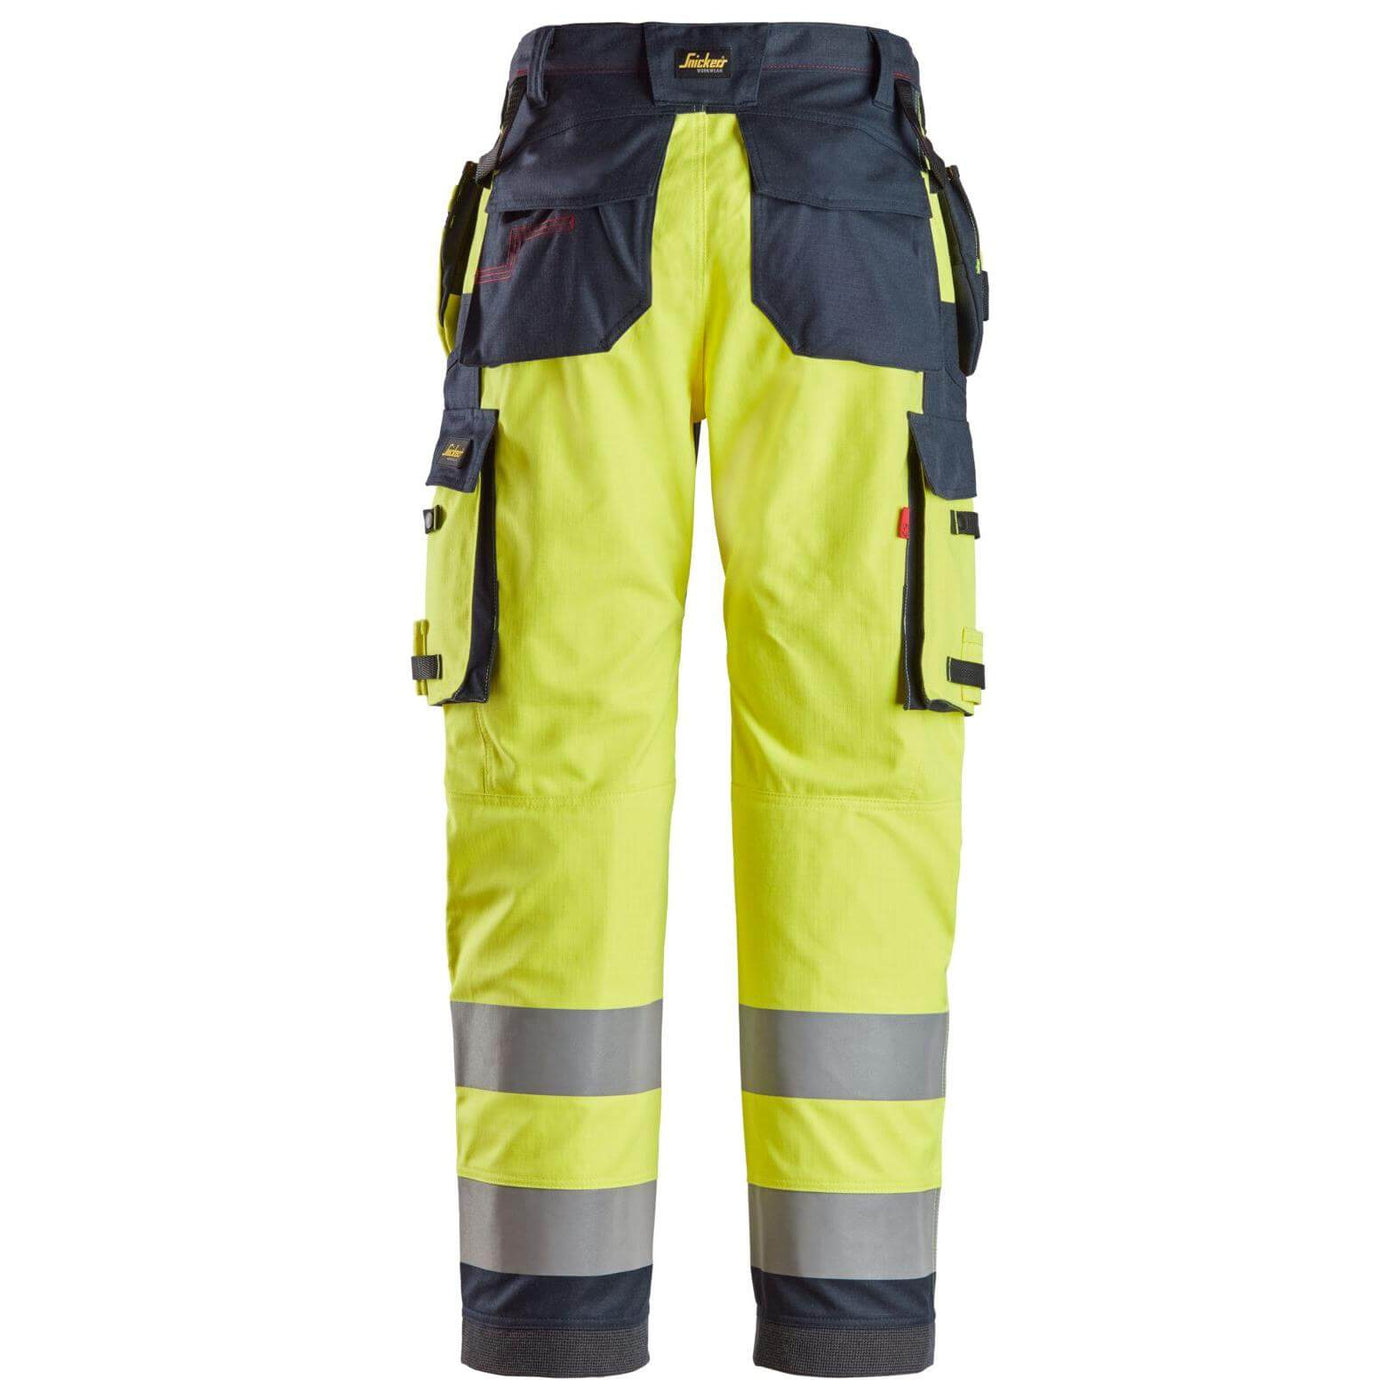 Snickers 6261 ProtecWork Hi Vis Work Trousers with Holster Pockets and Equal Leg Pockets Class 2 Hi Vis Yellow Navy Blue back3710006 #colour_hi-vis-yellow-navy-blue